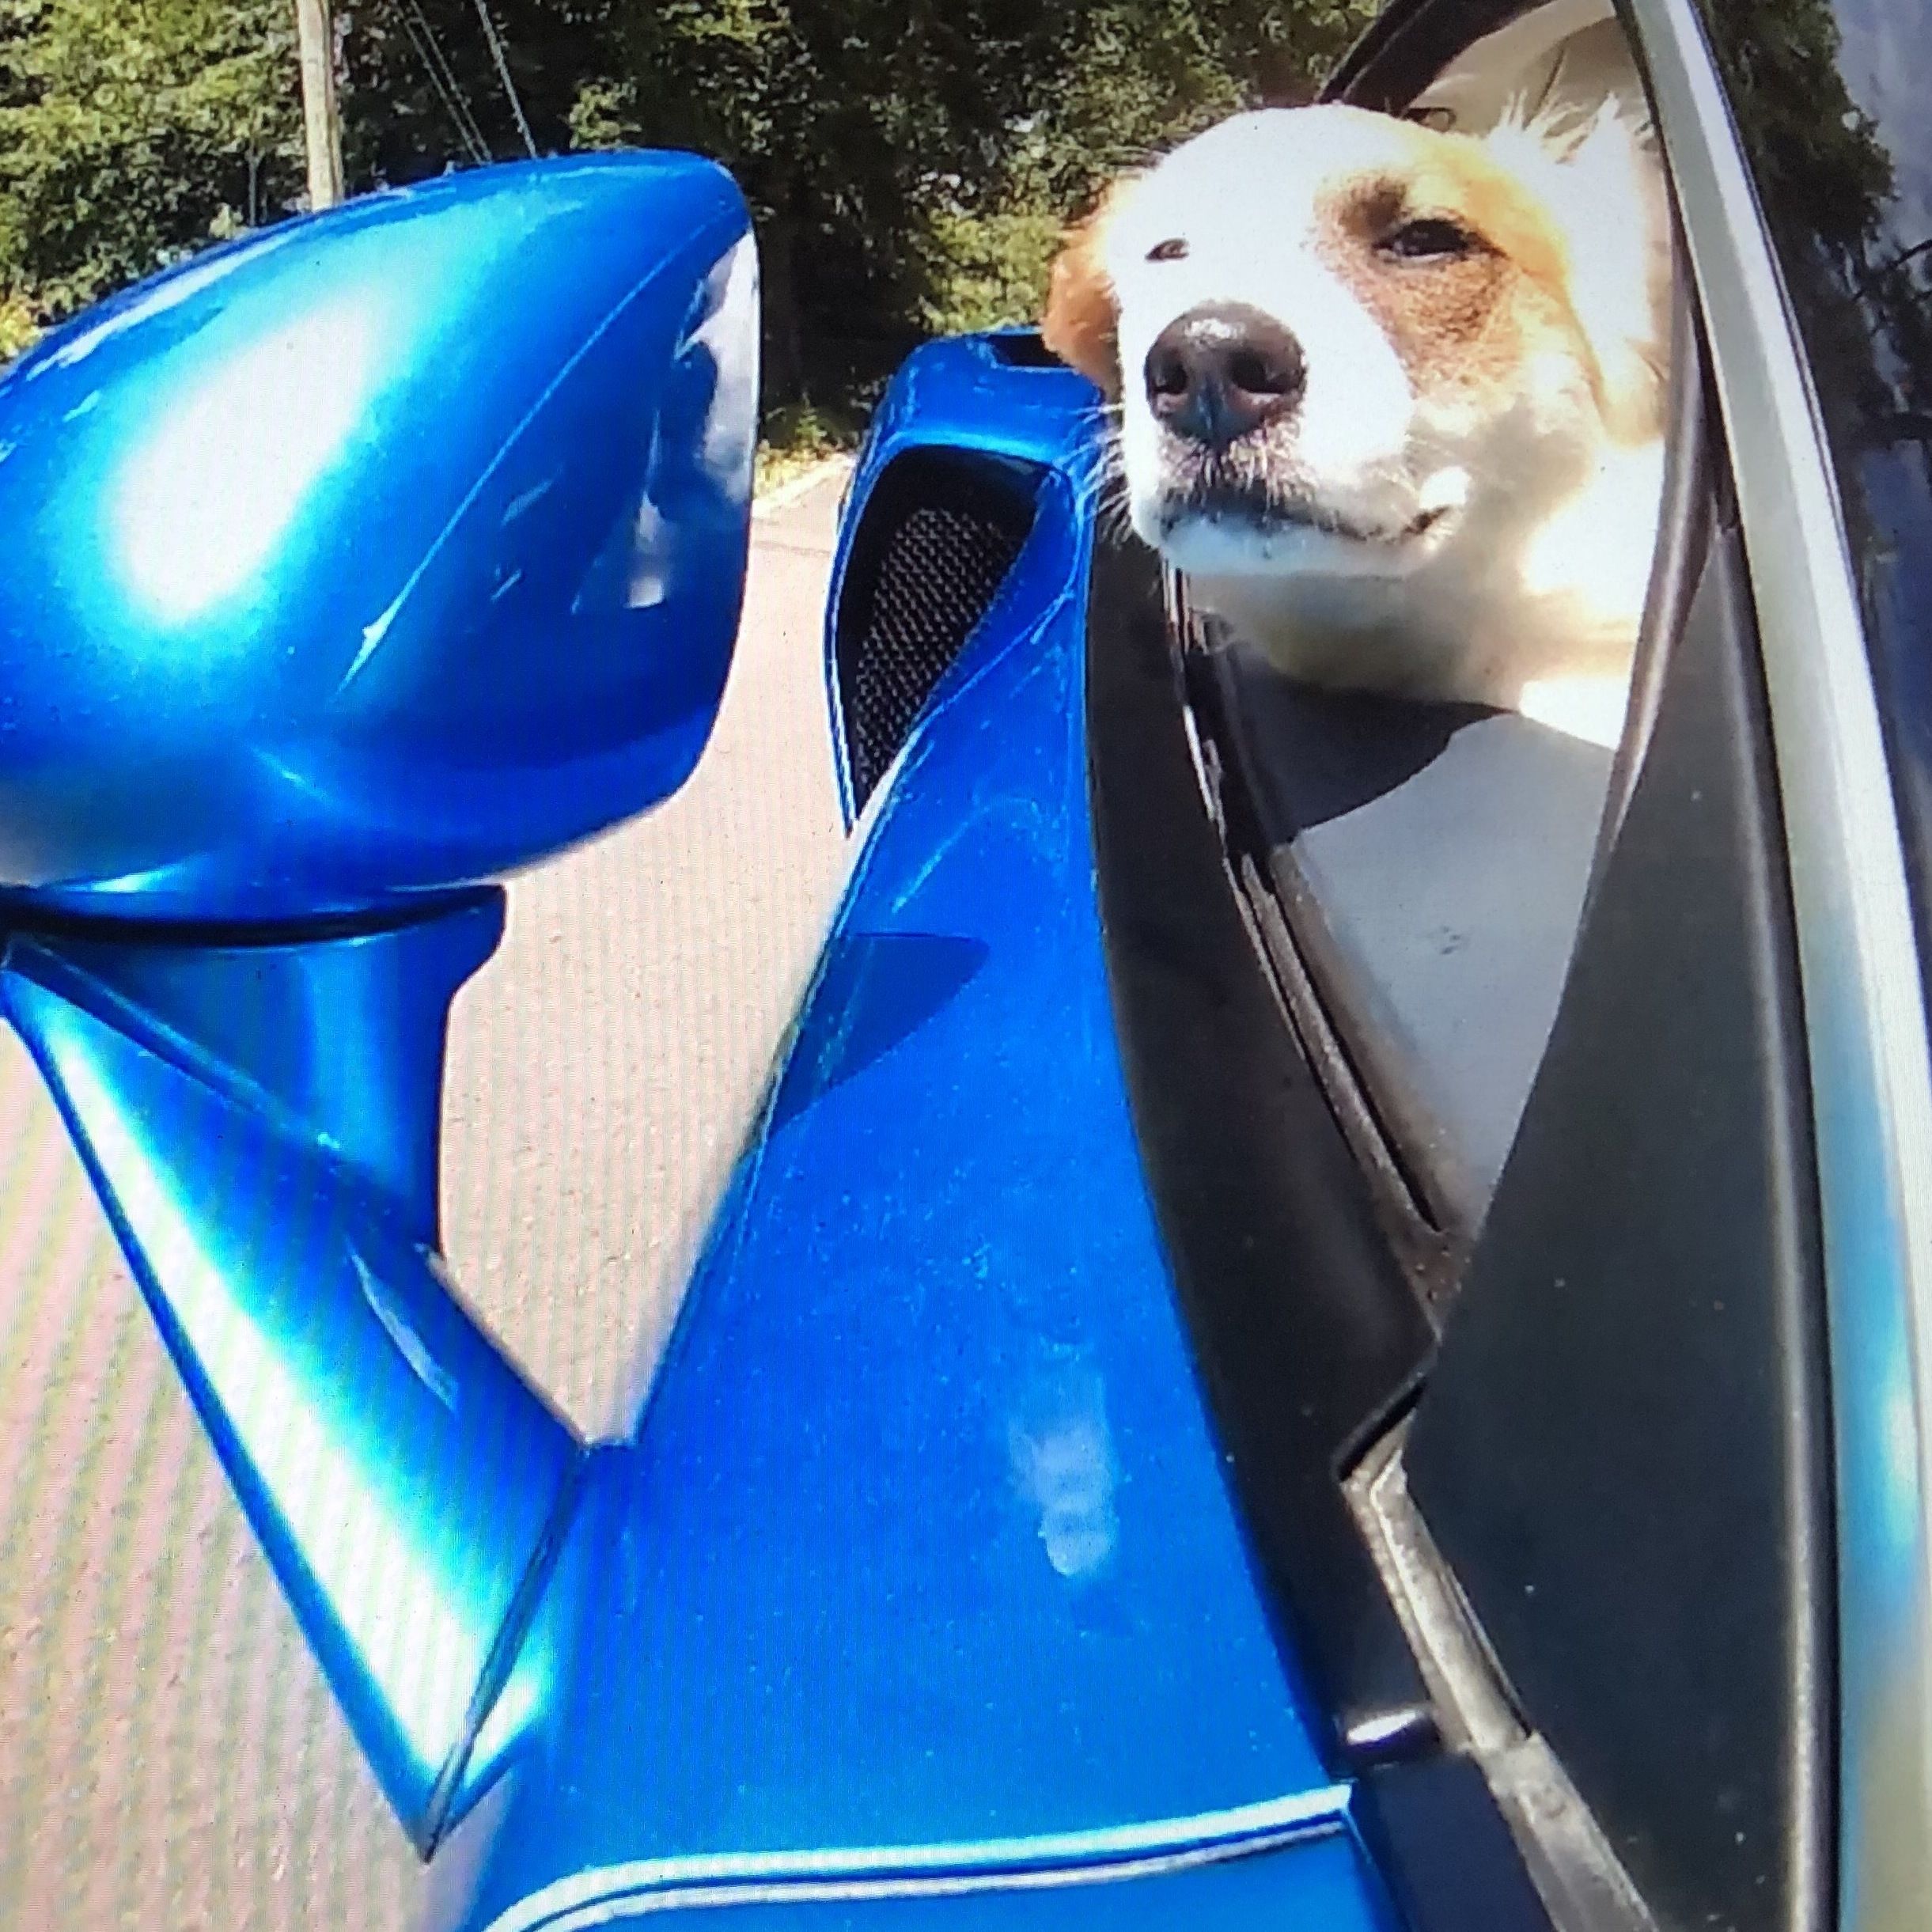 Florida May Ban Dogs Sticking Heads out of Car Windows